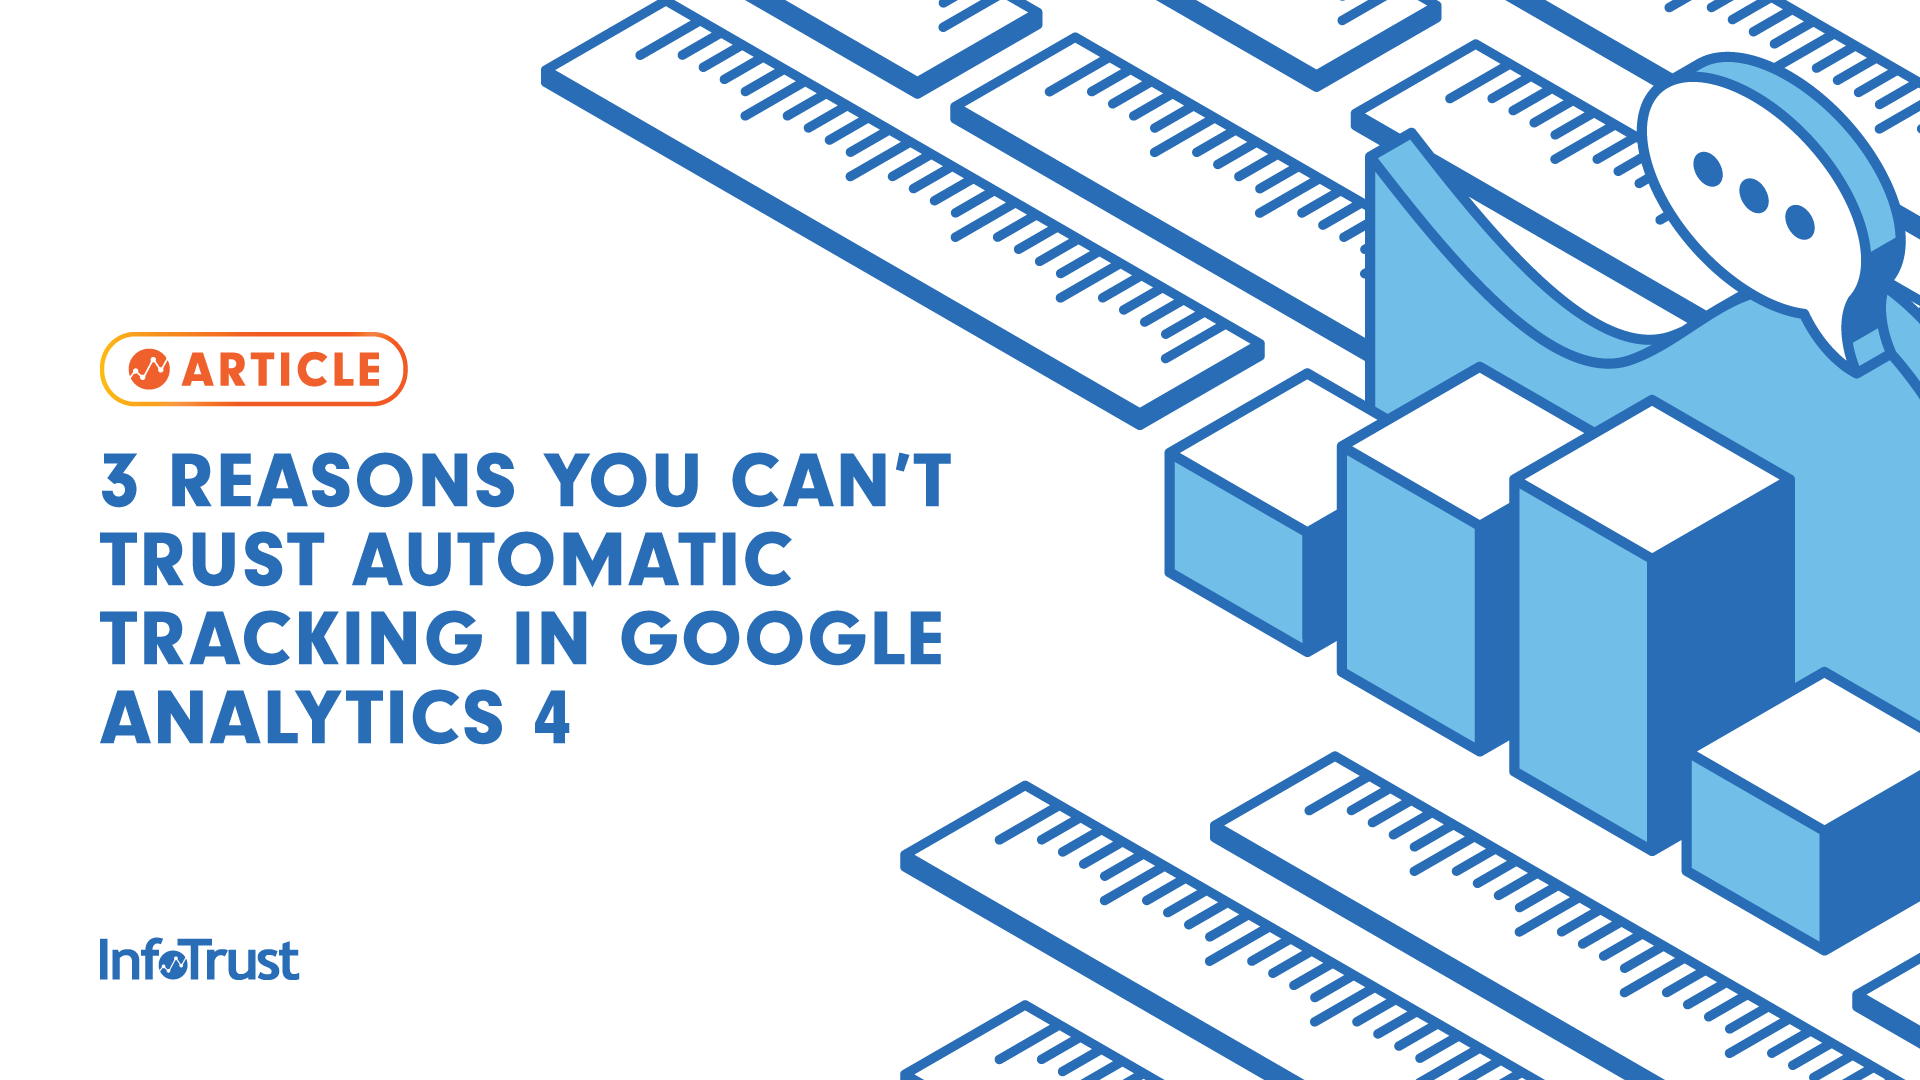 3 Reasons You Can’t Trust Automatic Tracking in Google Analytics 4